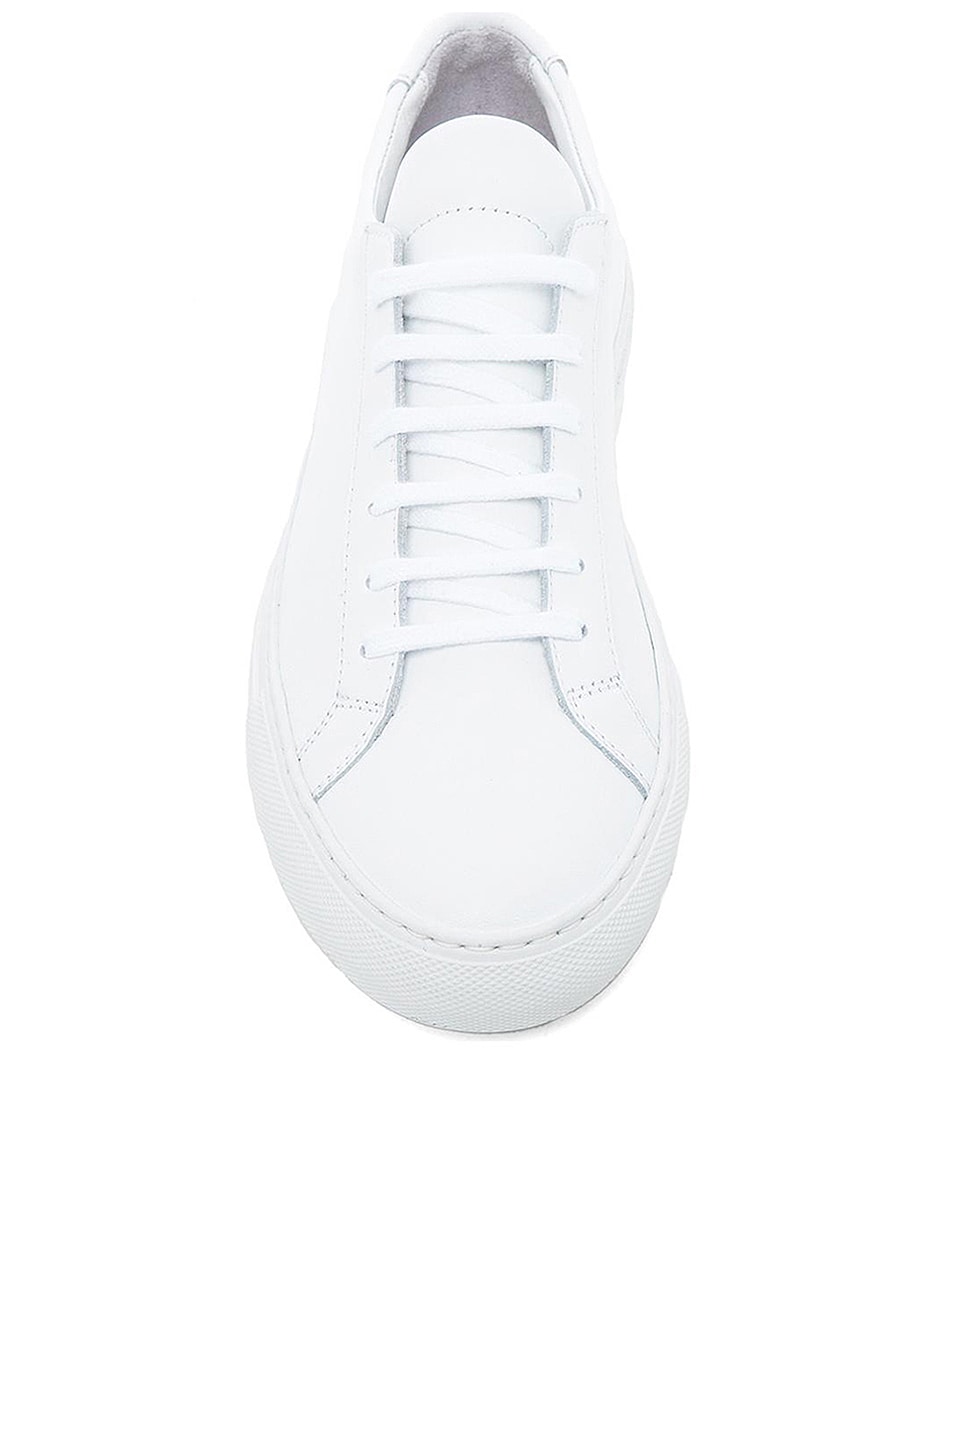 Common Projects Original Leather Achilles Low in White | REVOLVE